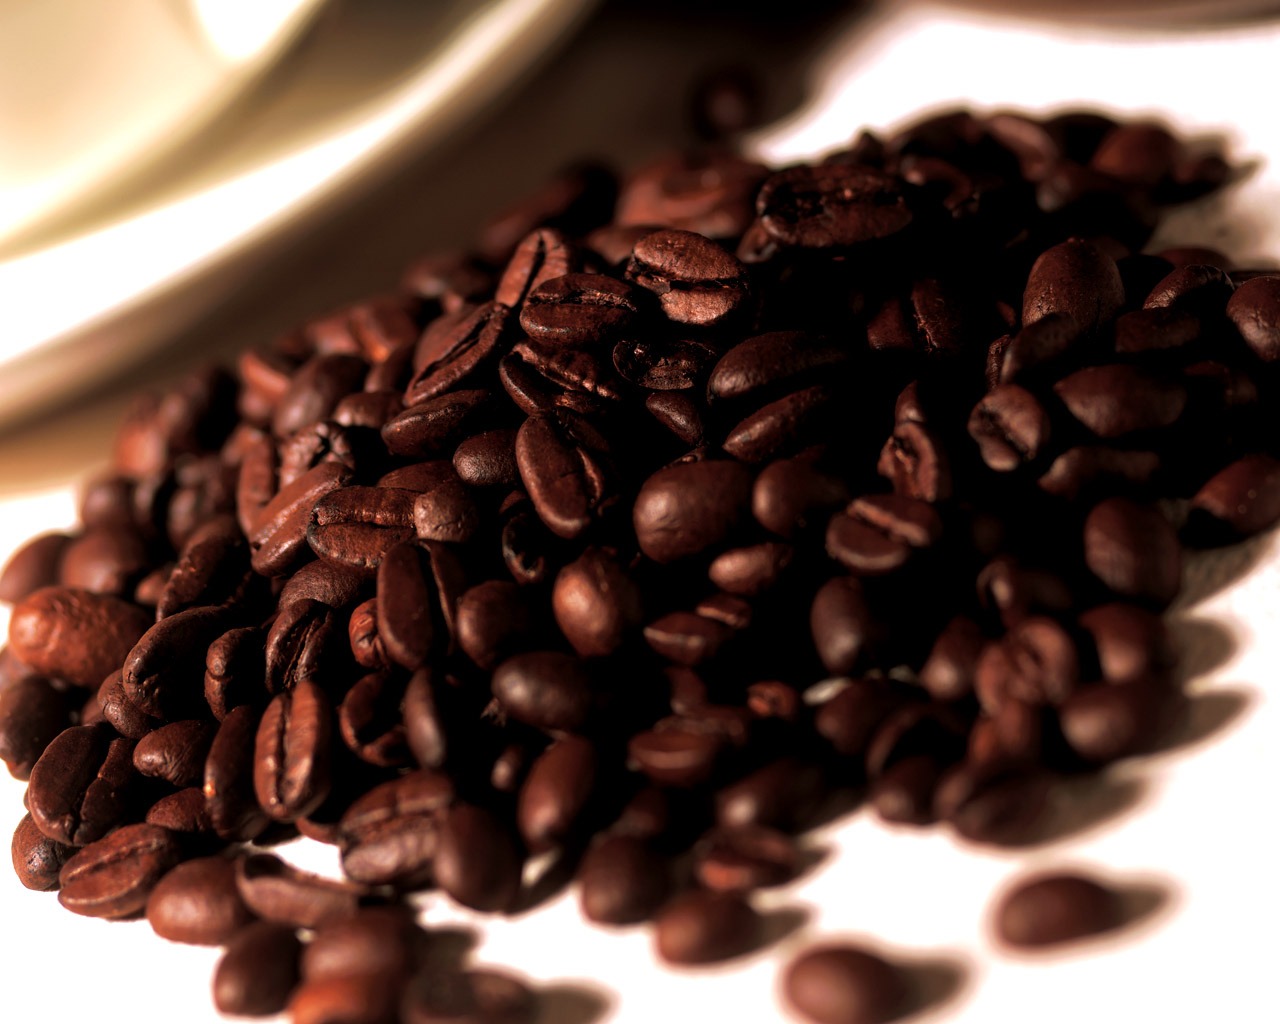 Coffee feature wallpaper (11) #5 - 1280x1024